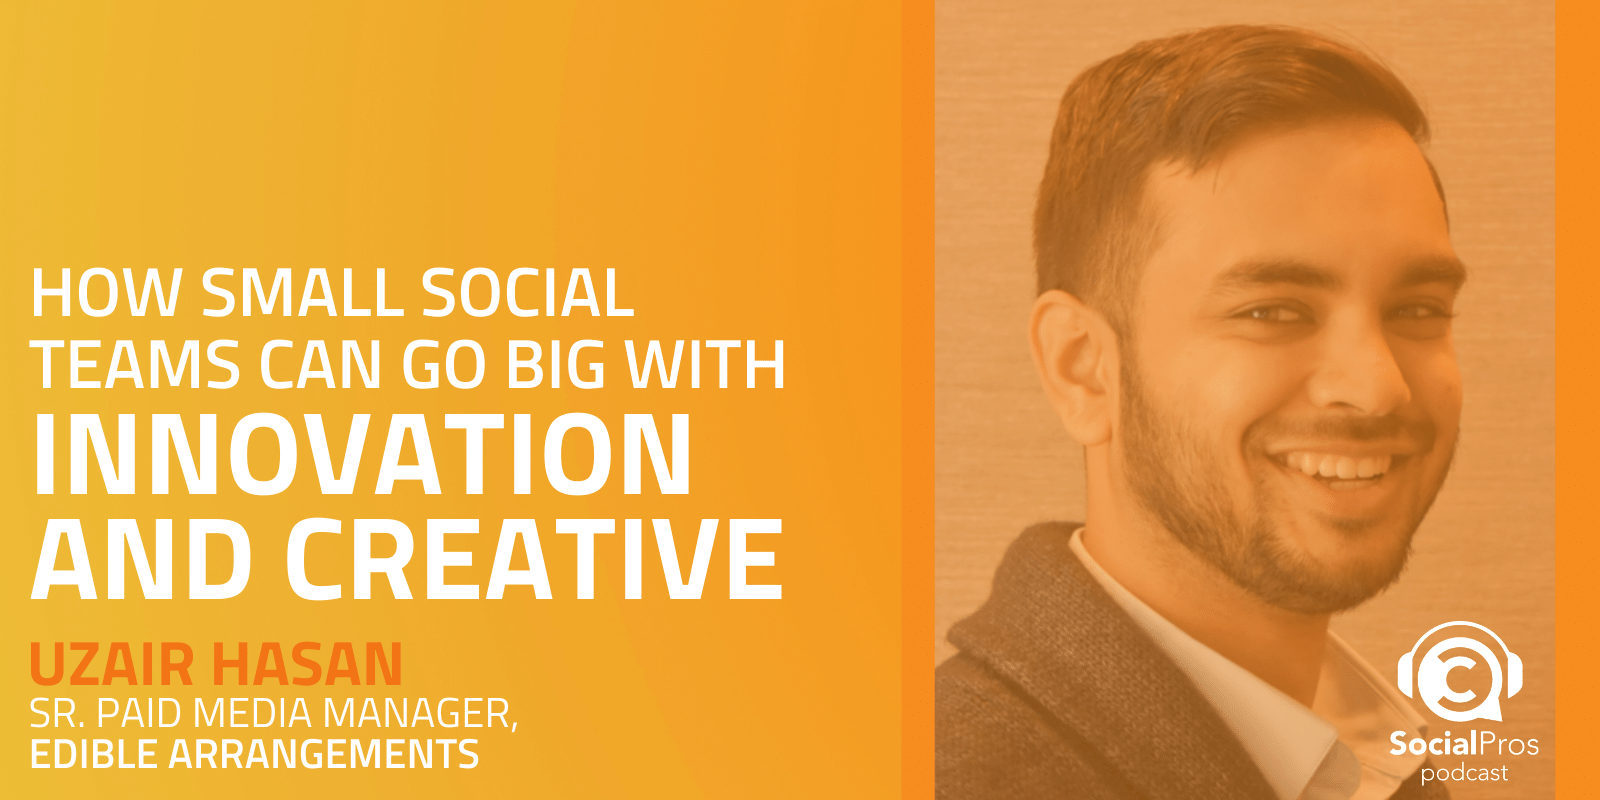 How Small Social Teams Can Go Big with Innovation and Creative